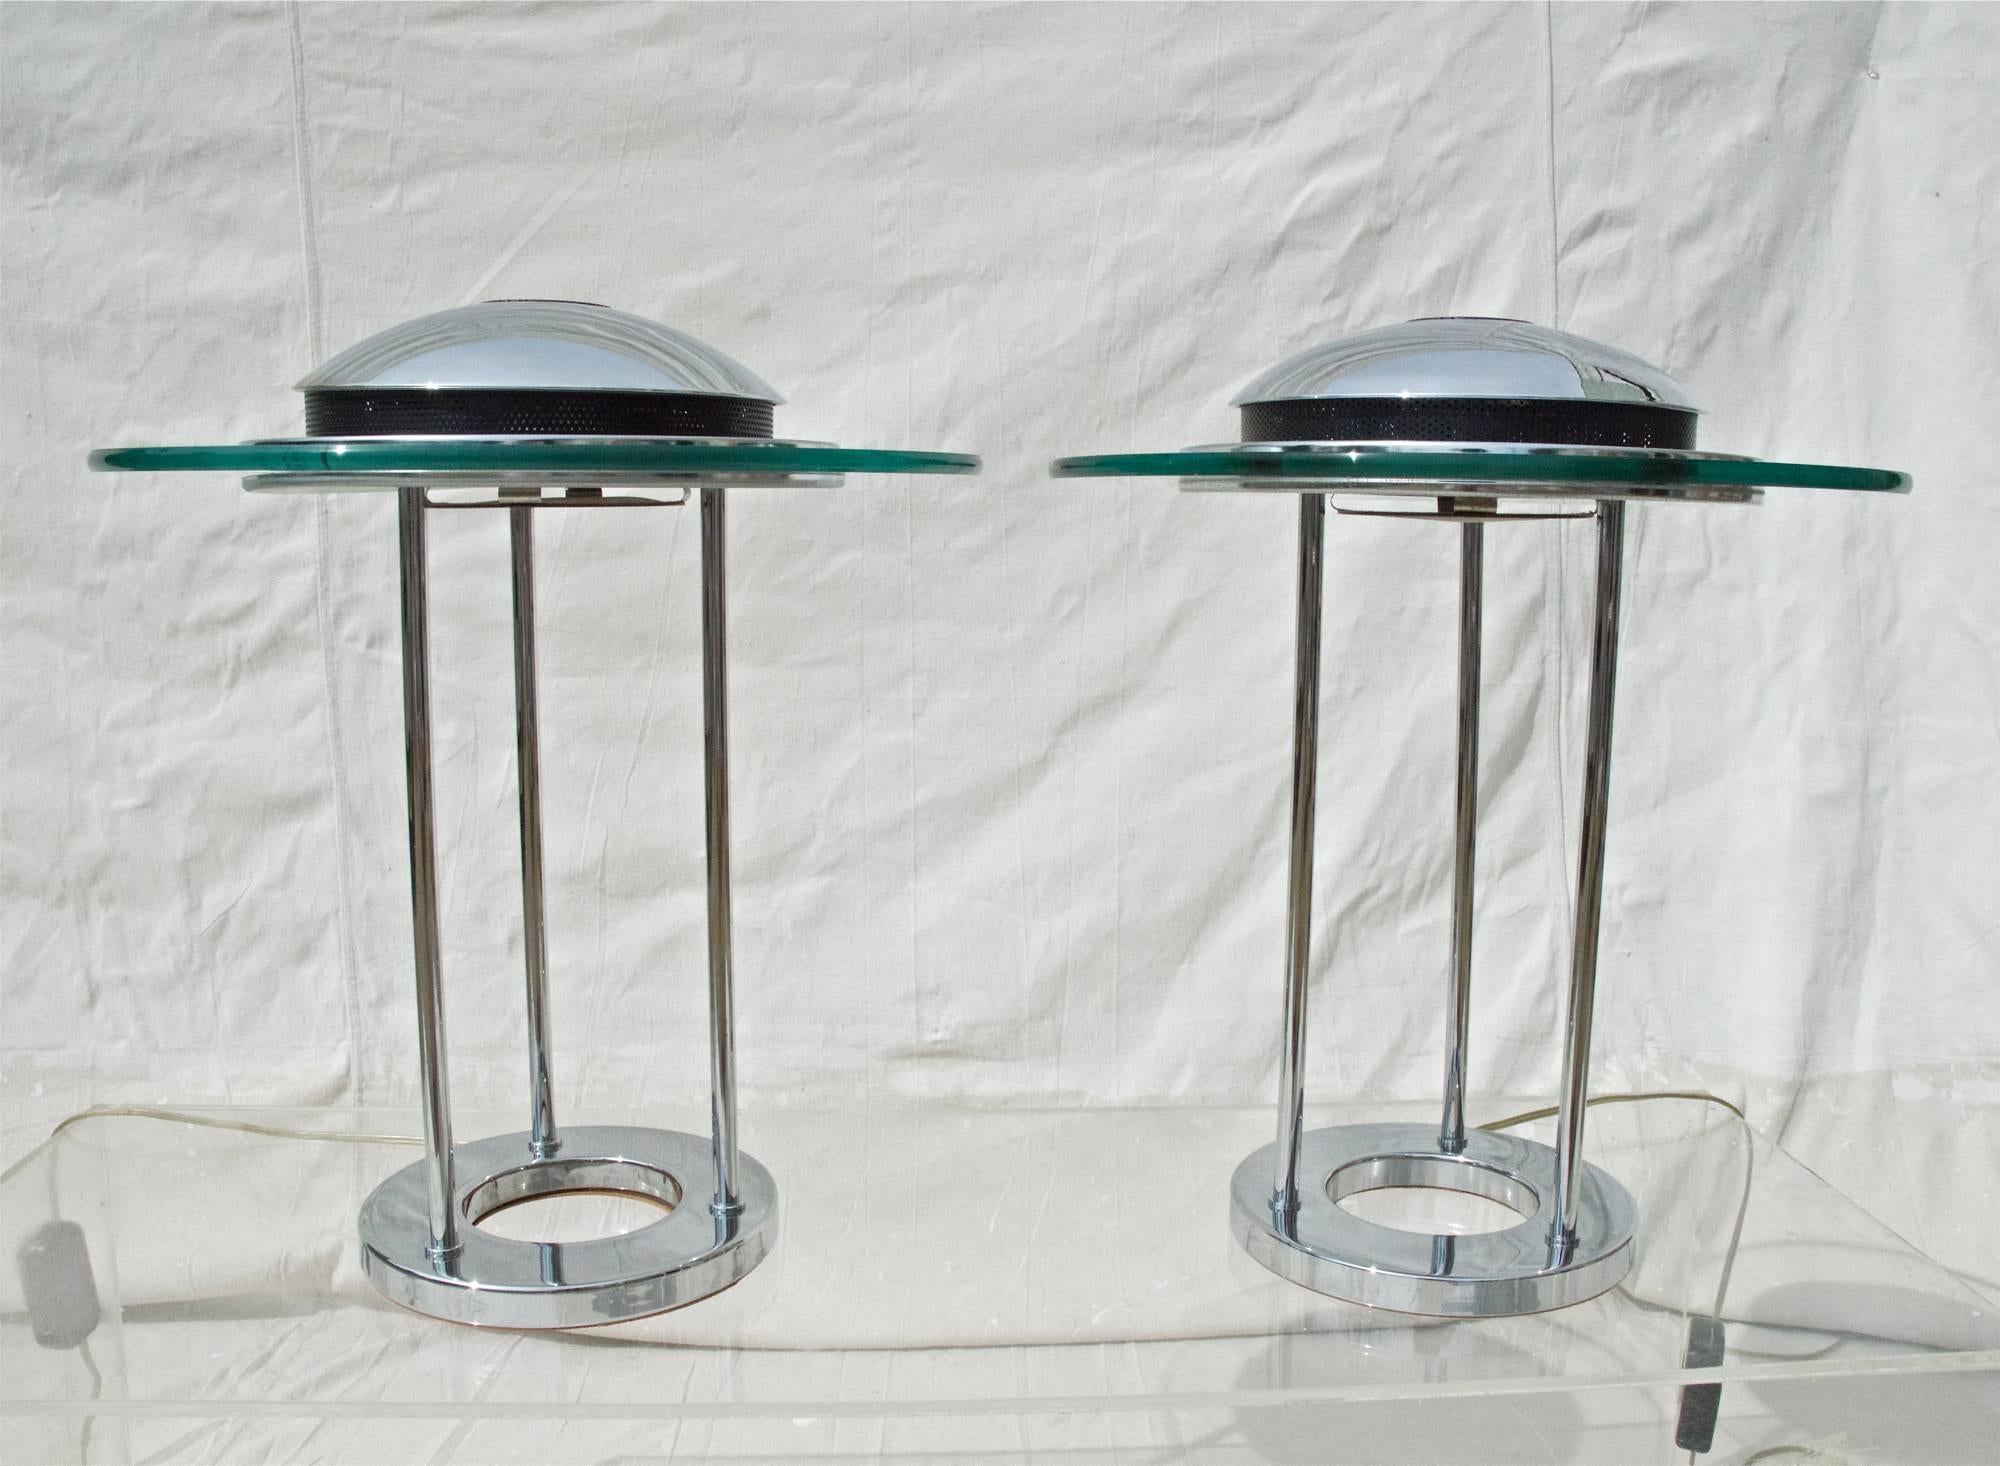 A sleek pair of modernist lamps of chrome and glass by Robert Sonneman for Kovacs. Super clean with very light use, the lamps were purchased in 1988 and have been lovingly looked out for by the original owner. Original dimmer switches and cords on